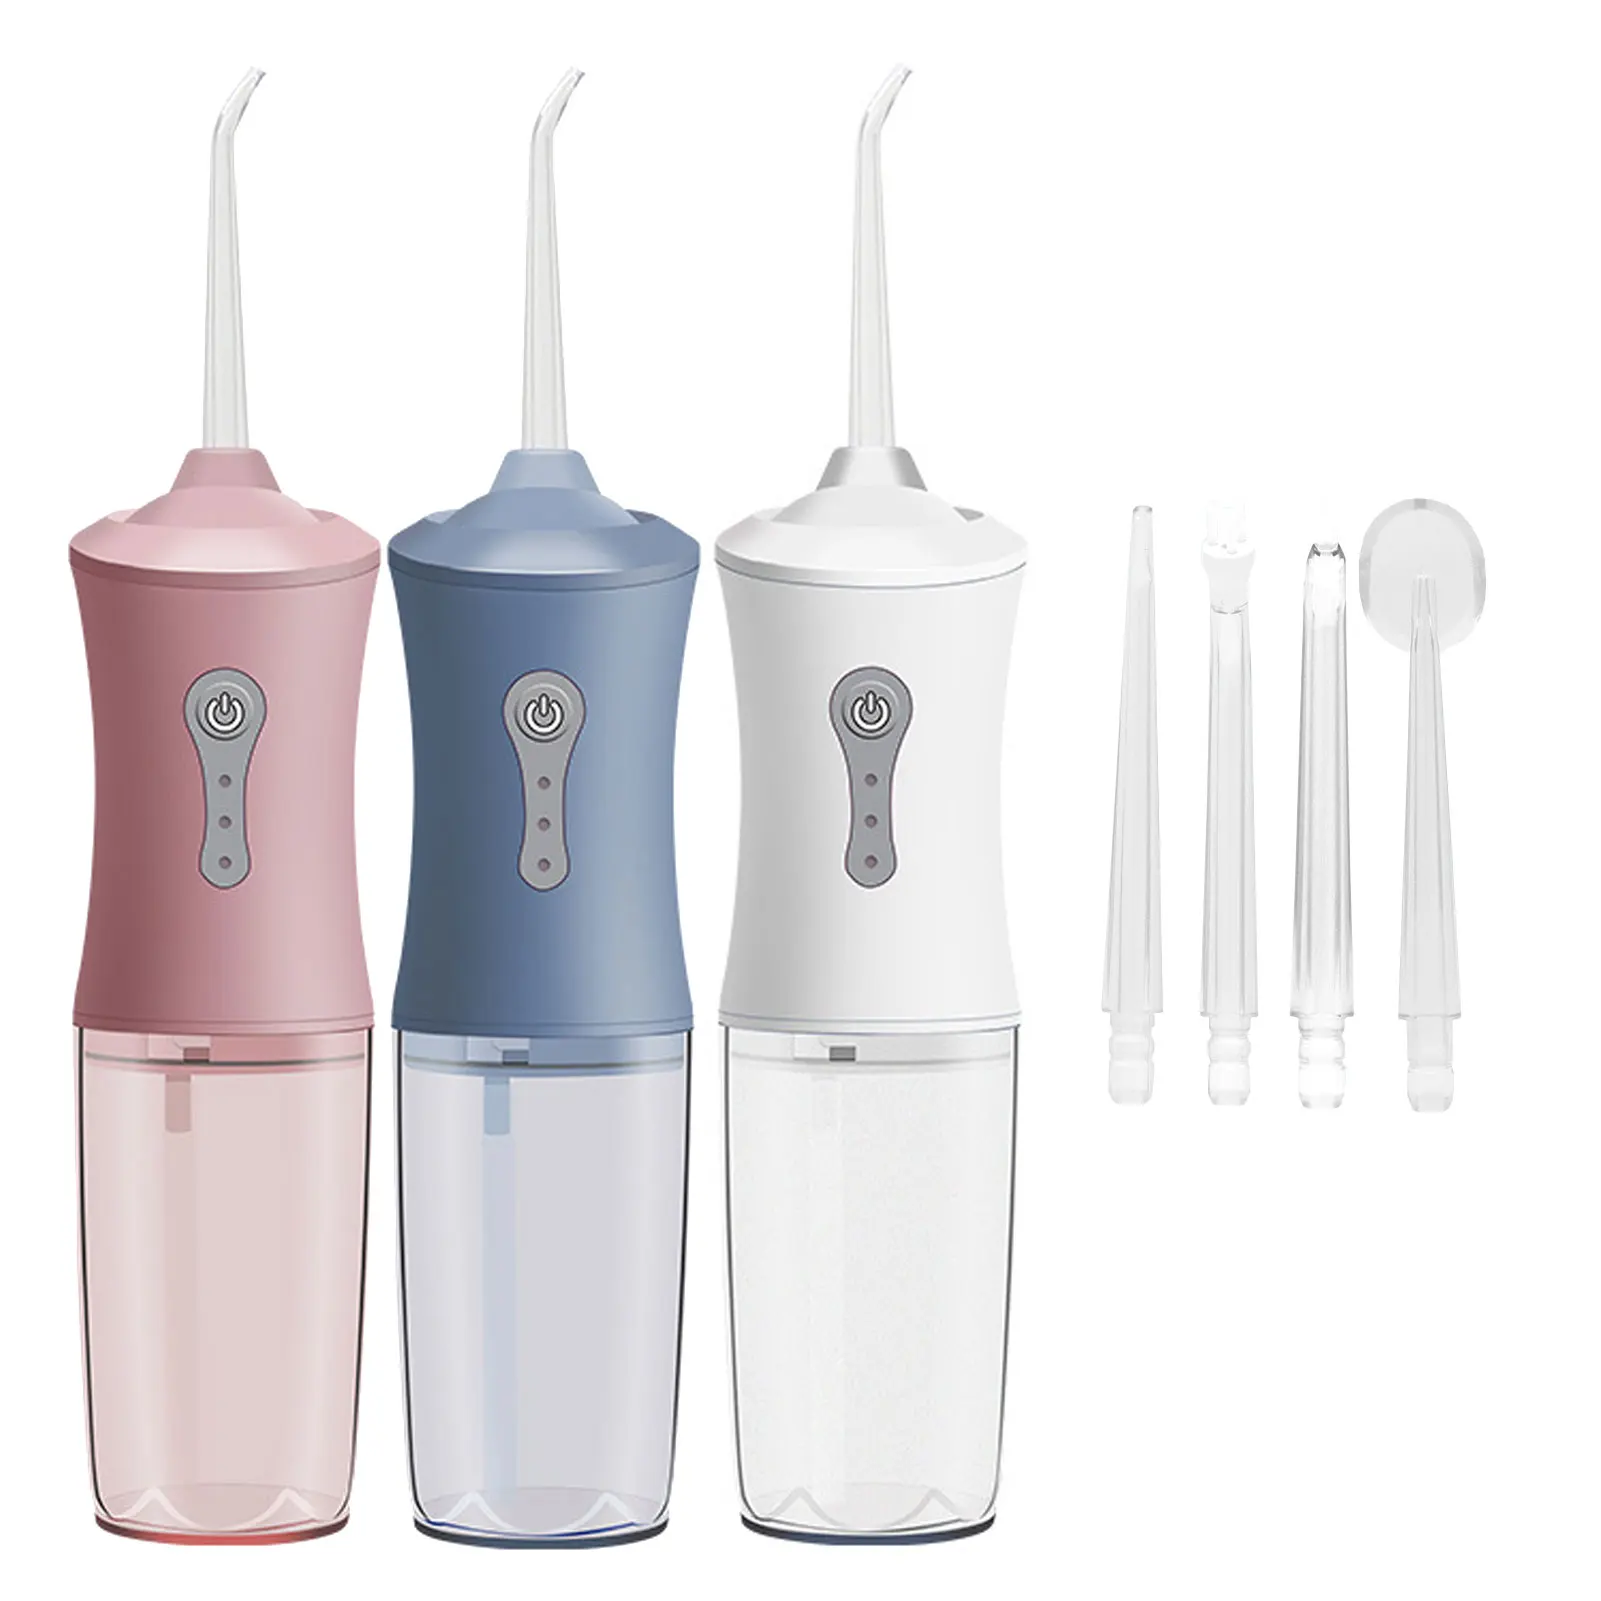 

Portable Oral Irrigator With 4 Cleaning Nozzles Water Flosser USB Rechargeable 3-Gear Water Jet 240ml Water Tank IPX7 Waterproof